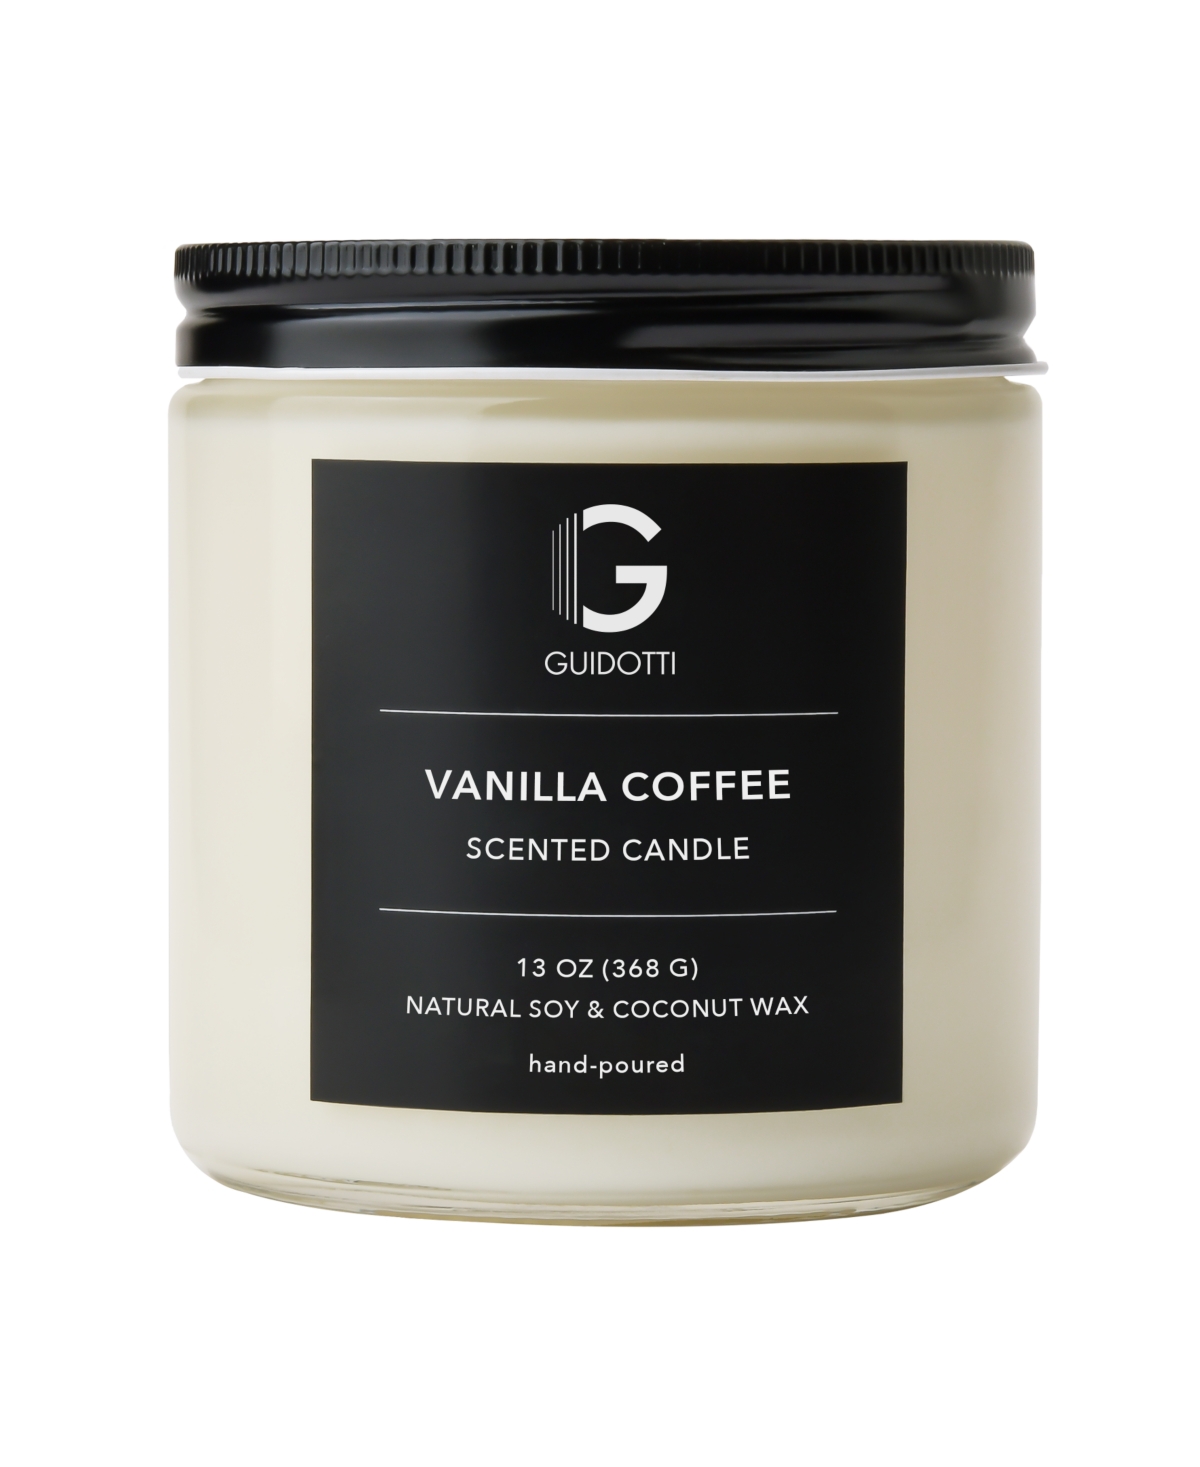 Vanilla Coffee Scented Candle, 2-Wick, 13 oz